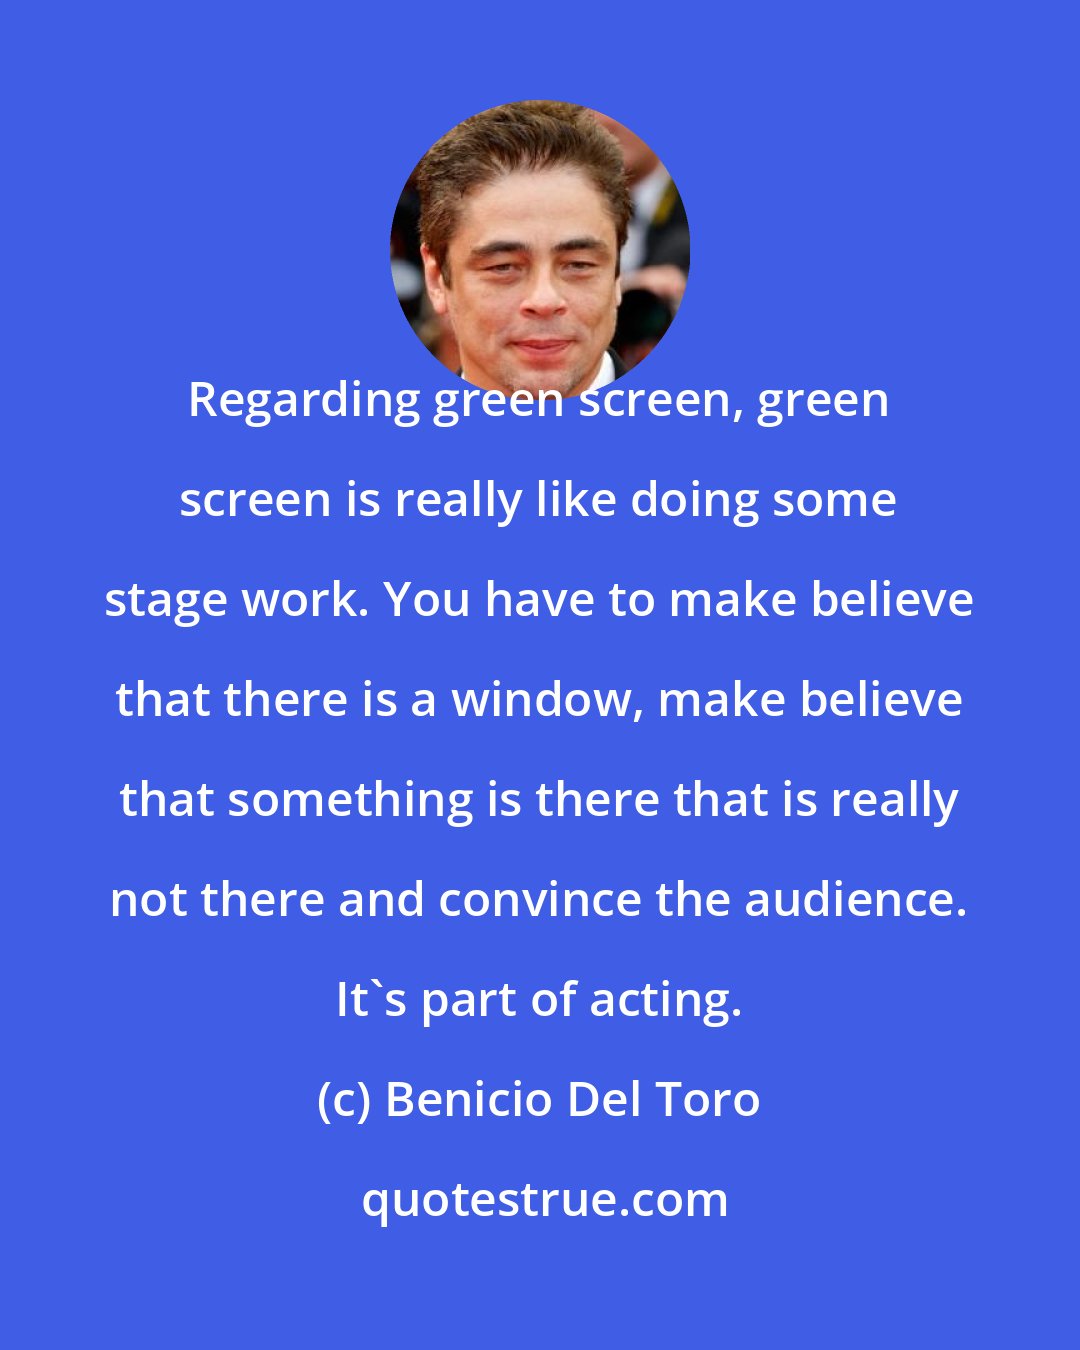 Benicio Del Toro: Regarding green screen, green screen is really like doing some stage work. You have to make believe that there is a window, make believe that something is there that is really not there and convince the audience. It's part of acting.